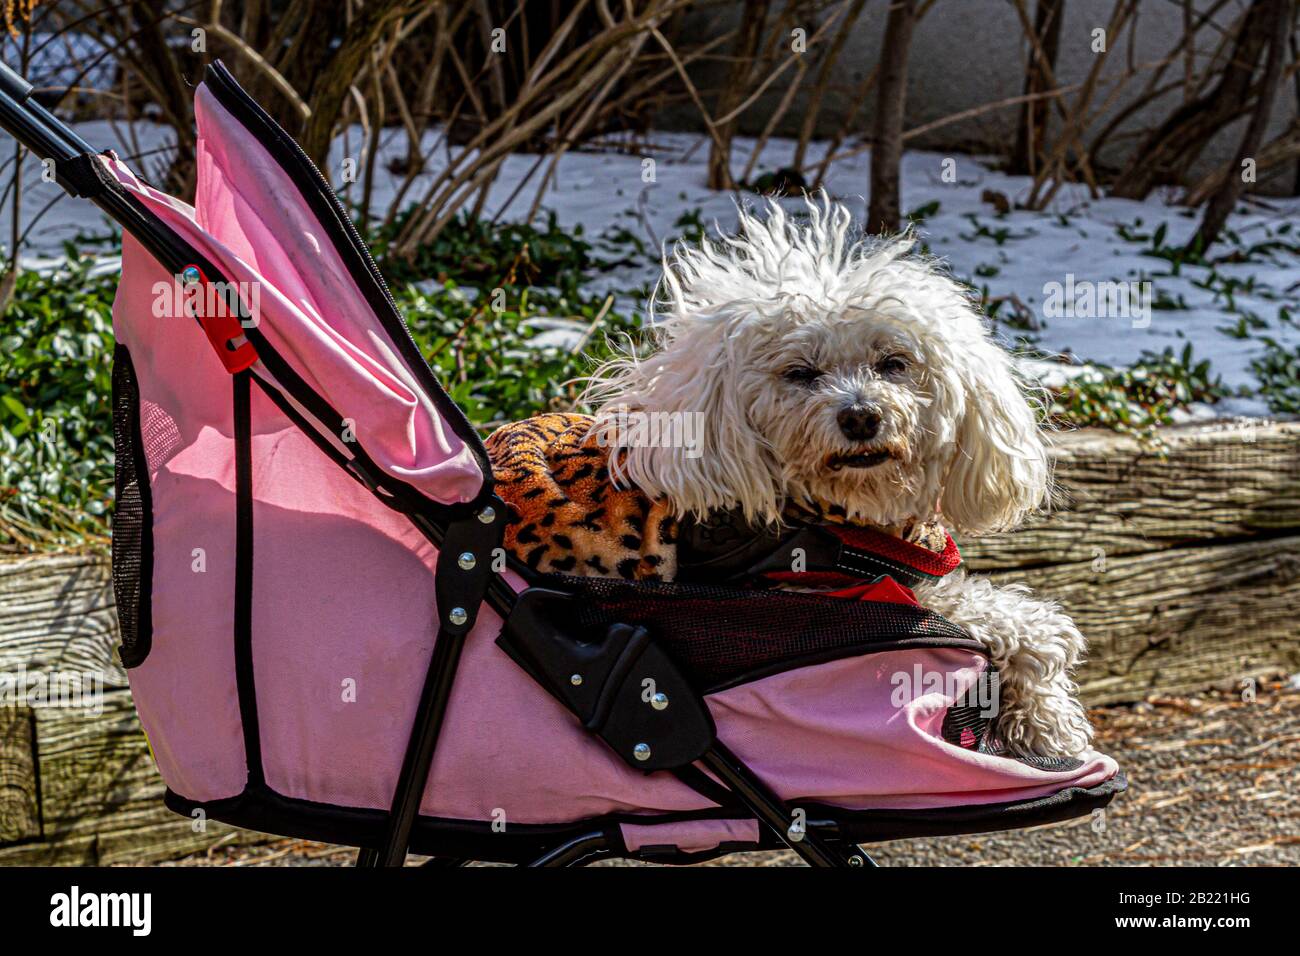 An old poodle being walked around in a stroller Stock Photo